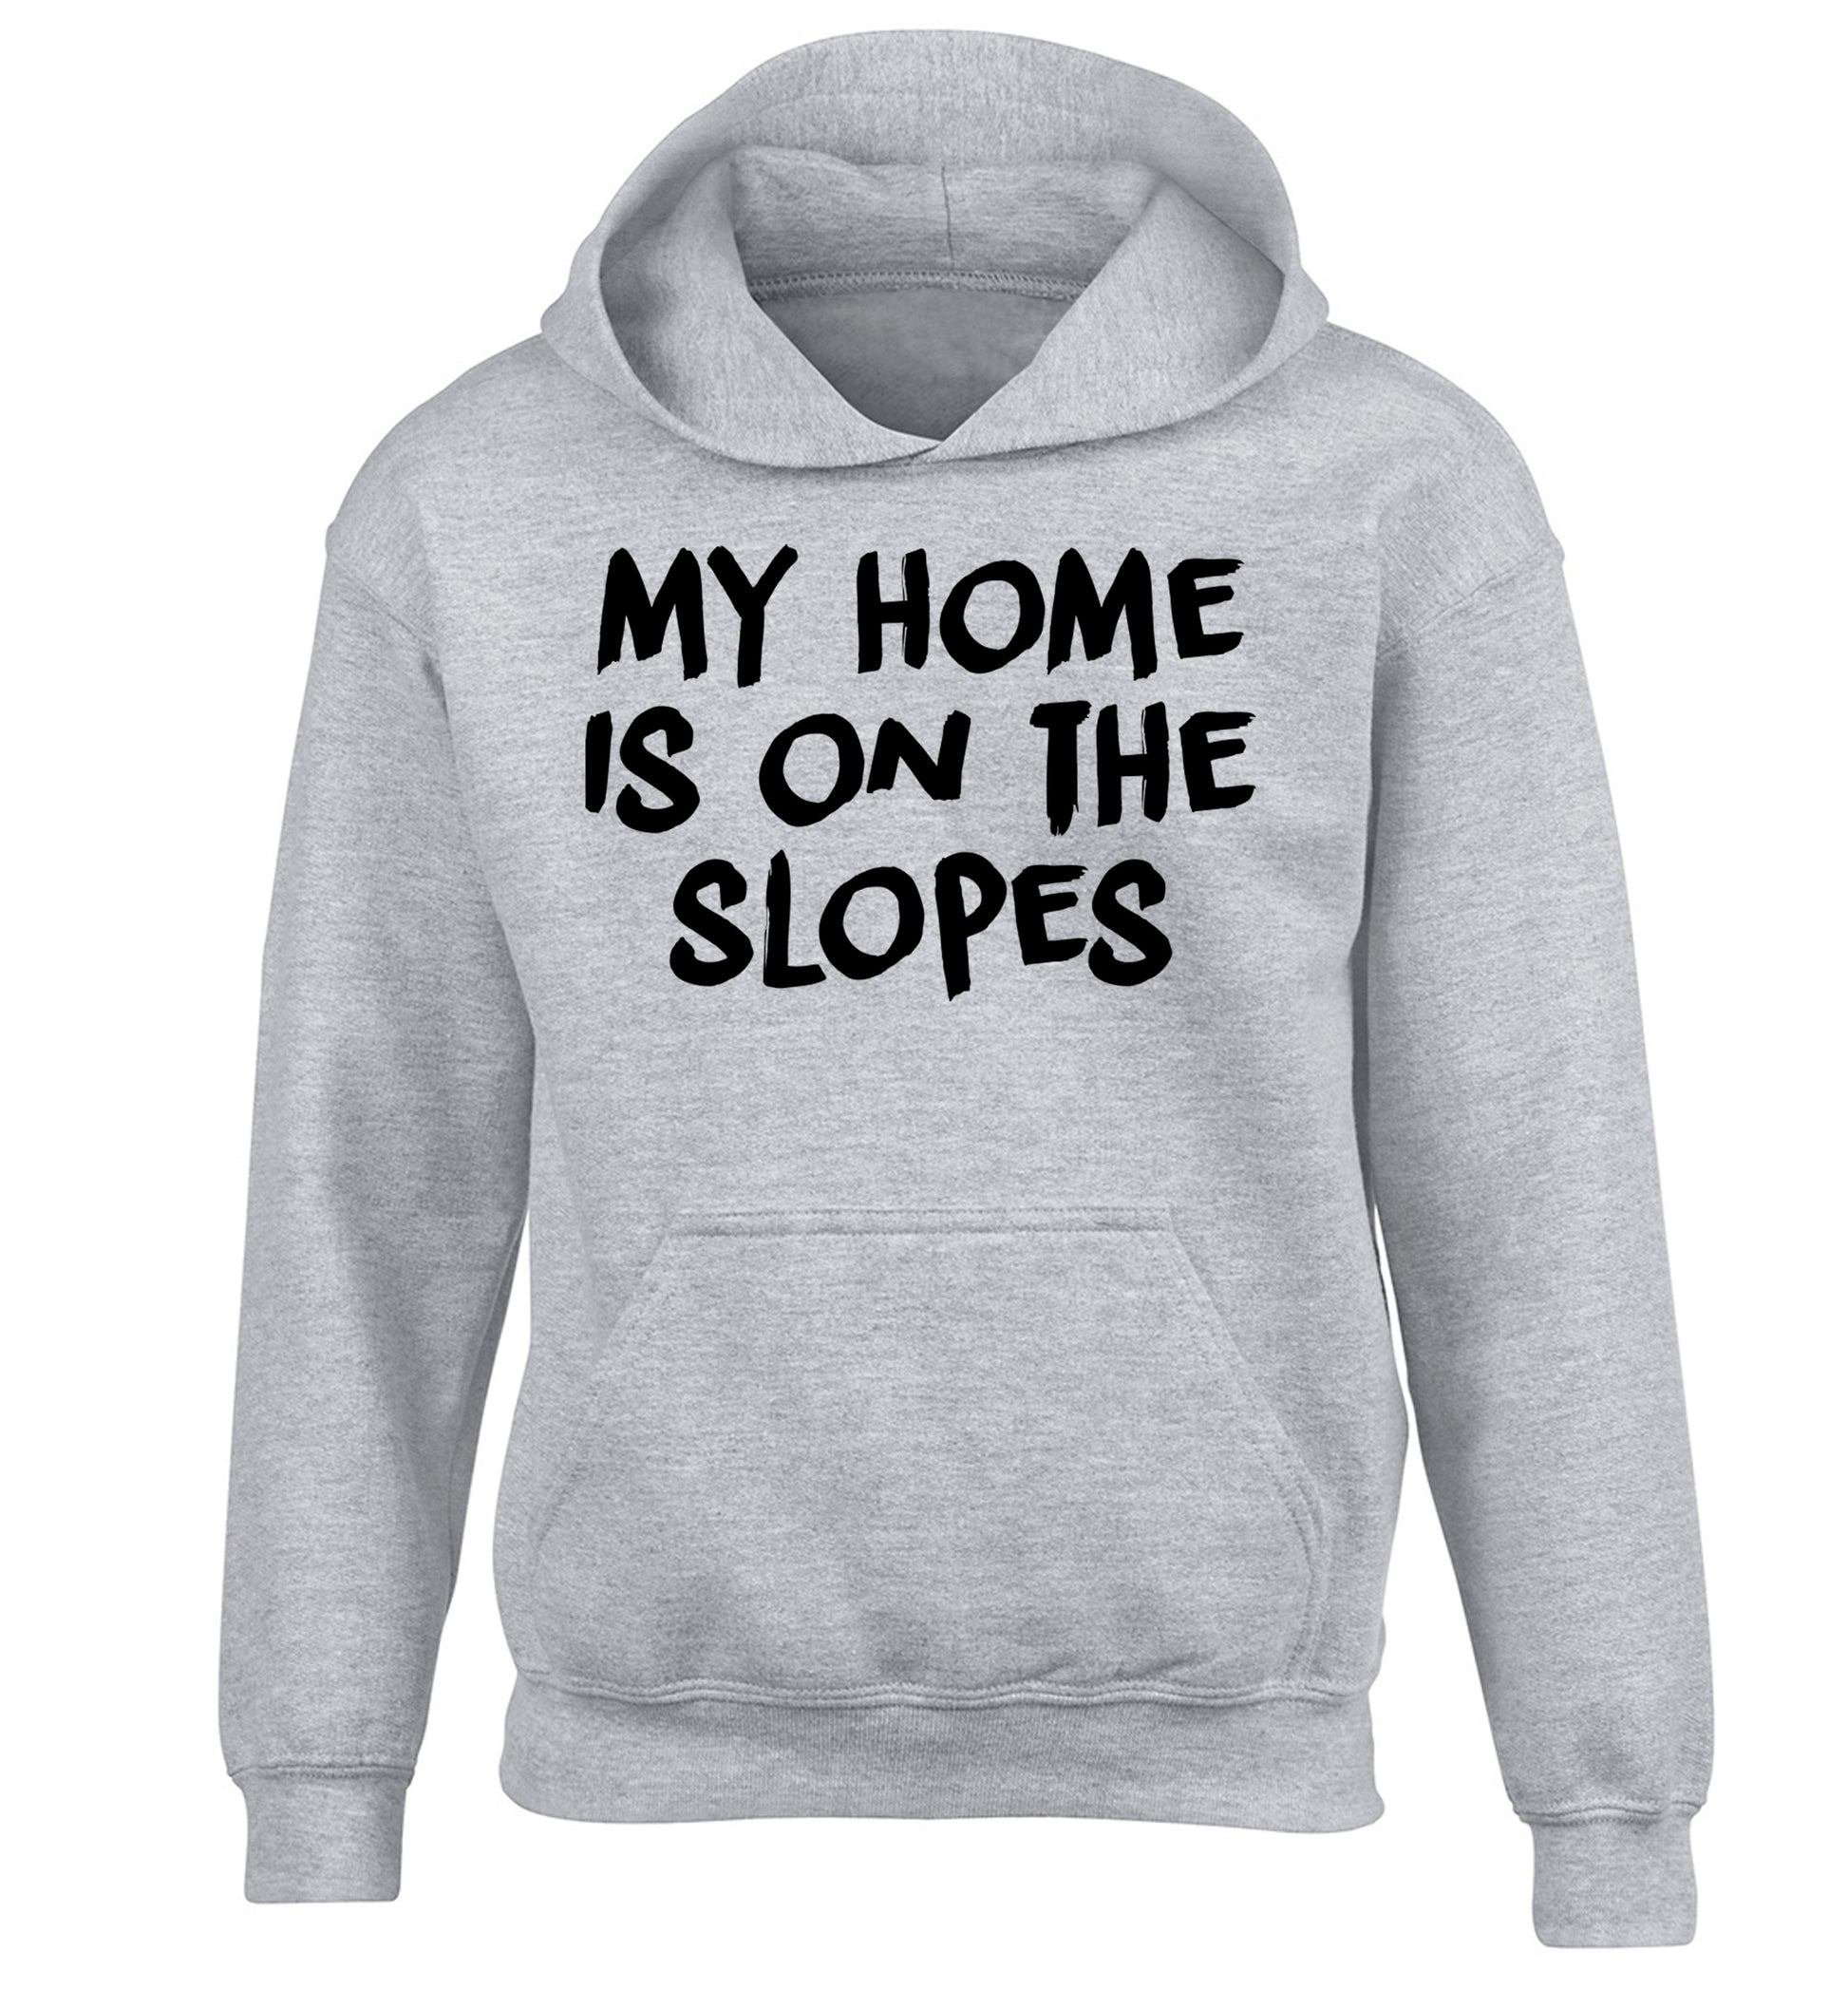 My home is on the slopes children's grey hoodie 12-14 Years